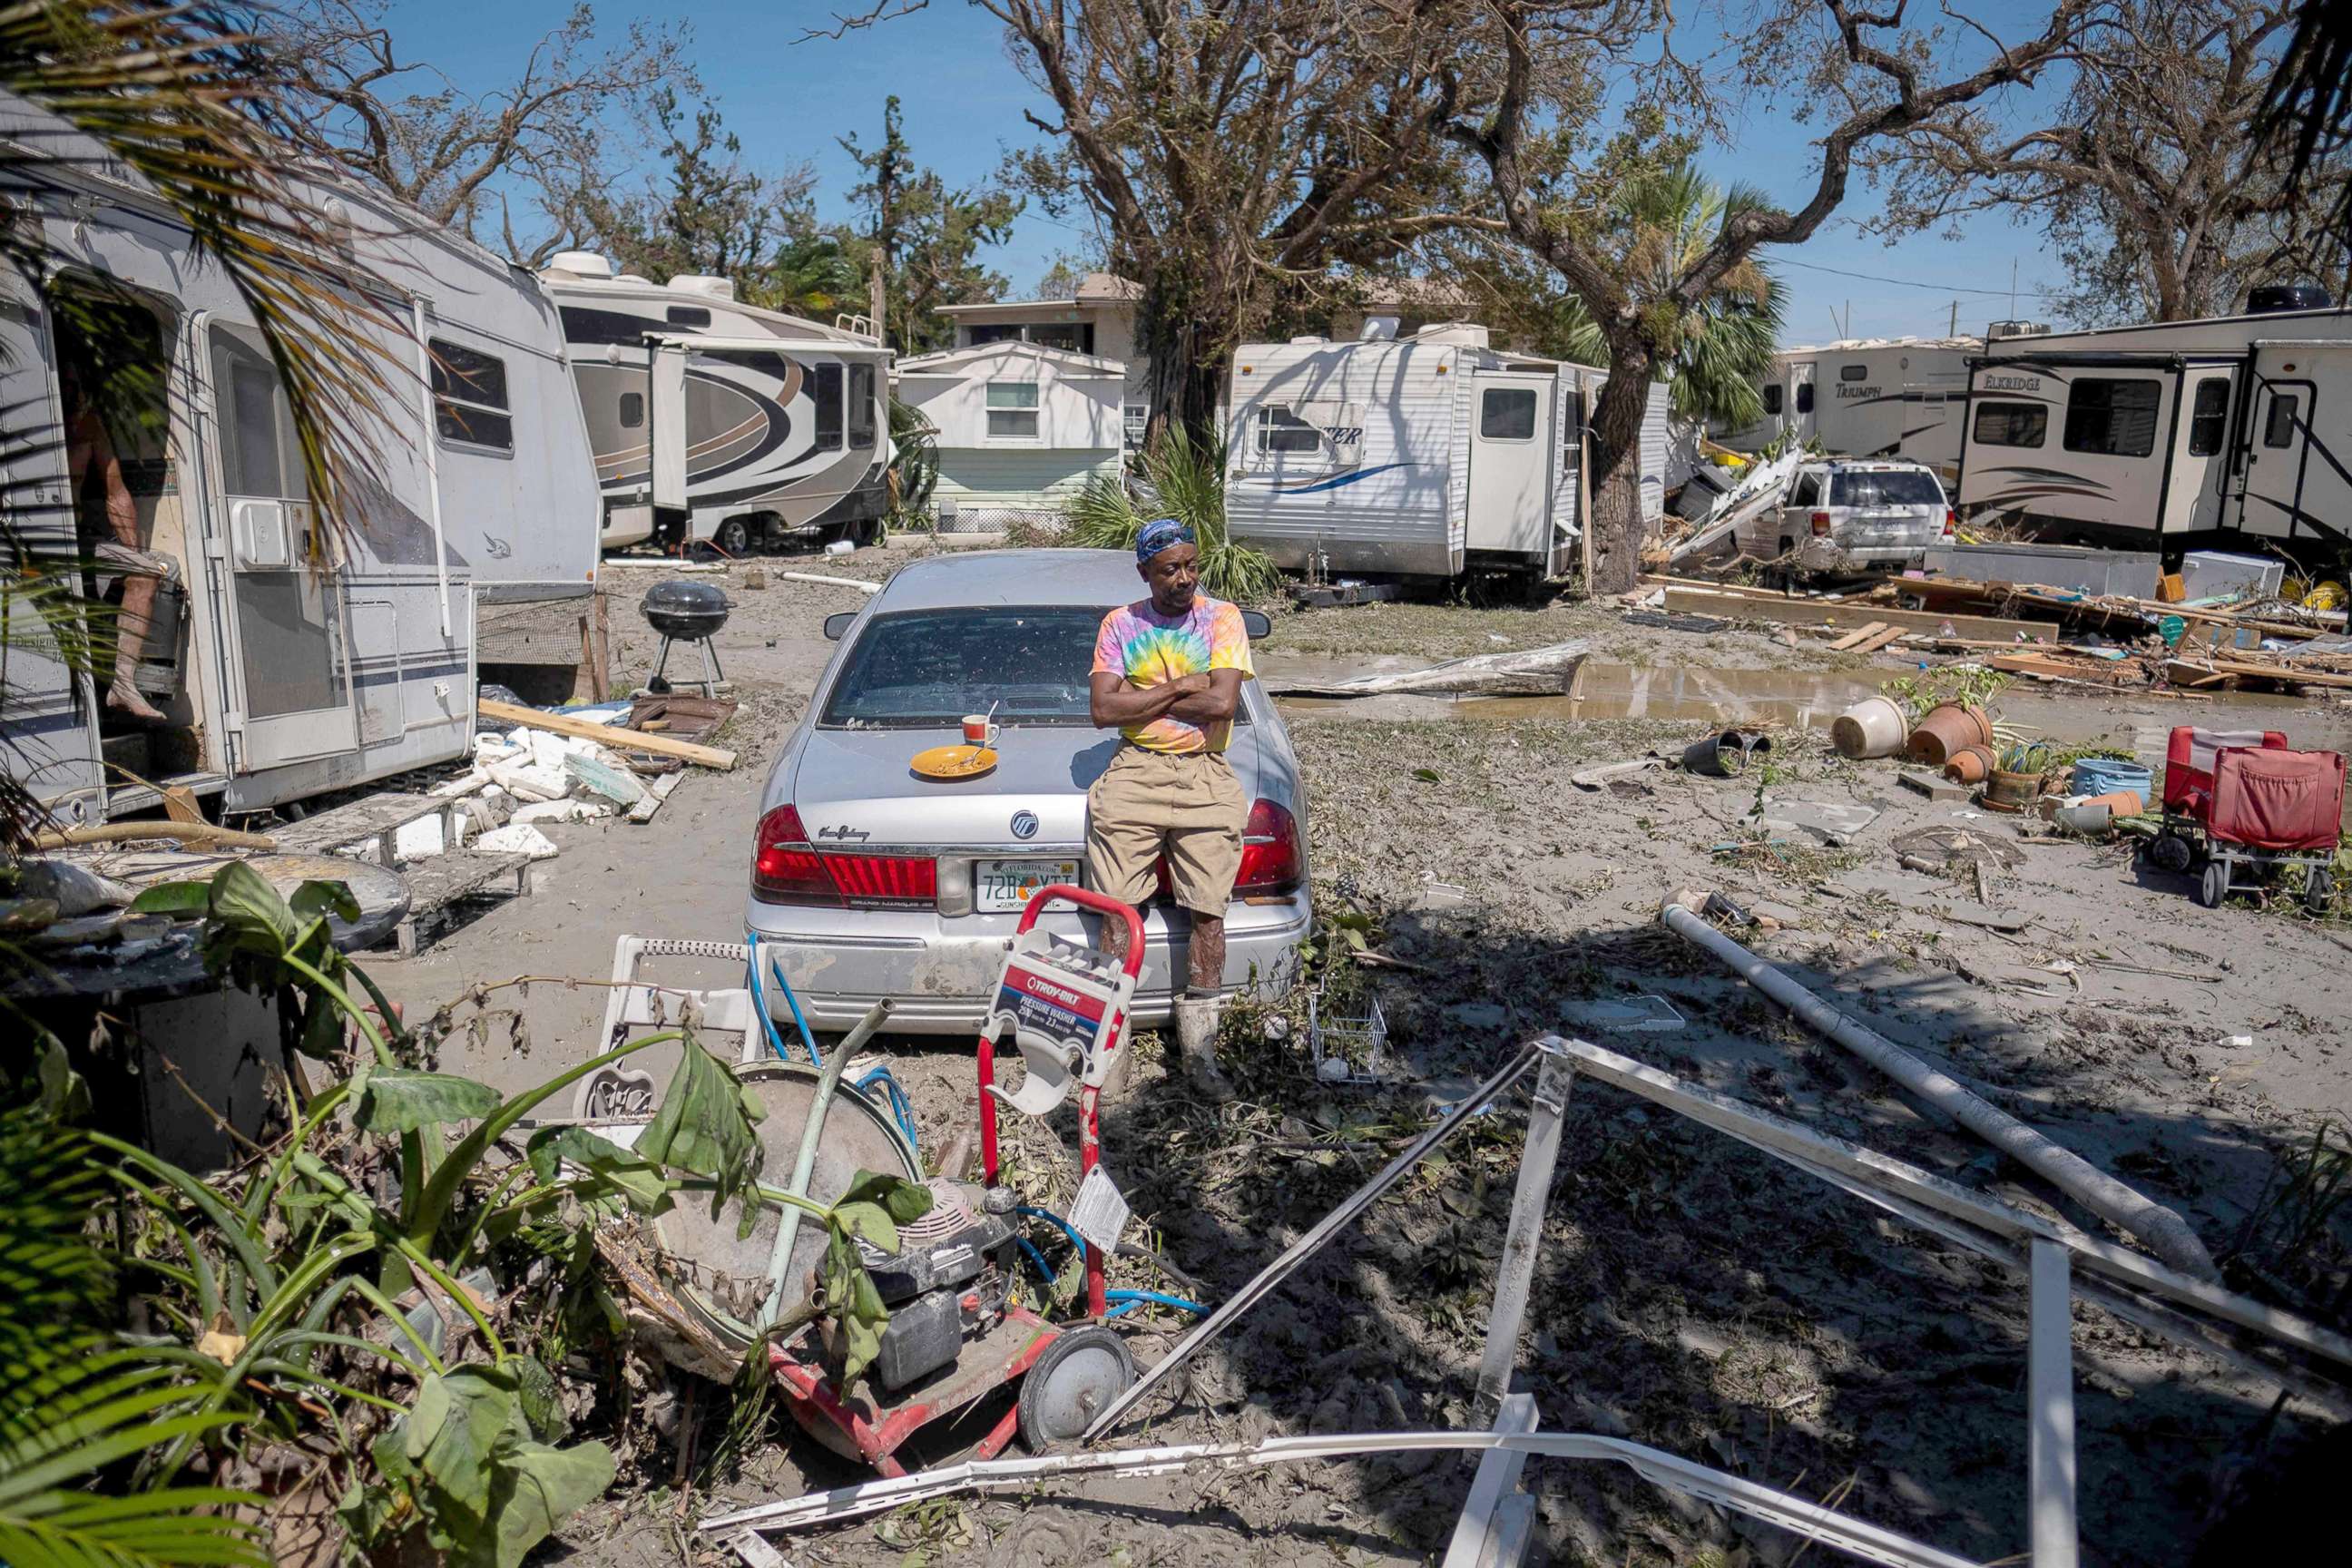 PHOTO: Sean Hunt sings on the trunk of his damaged car in front of his camper in the aftermath of Hurricane Ian in Fort Myers, Fla., Sept. 29, 2022.